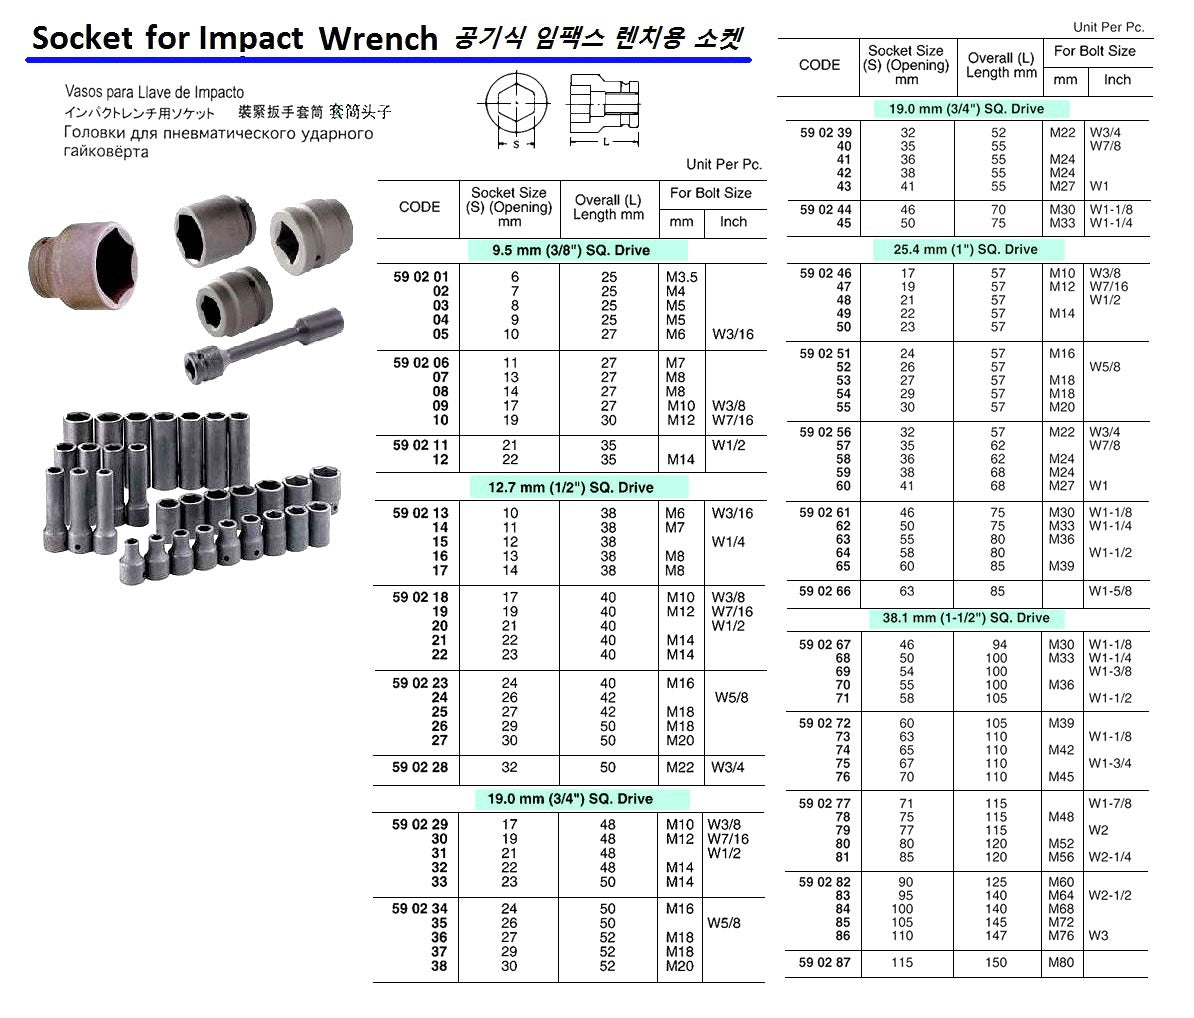 590205-SOCKET FOR IMPACT WRENCH, 9.5MM/SQ DR. X 10MM